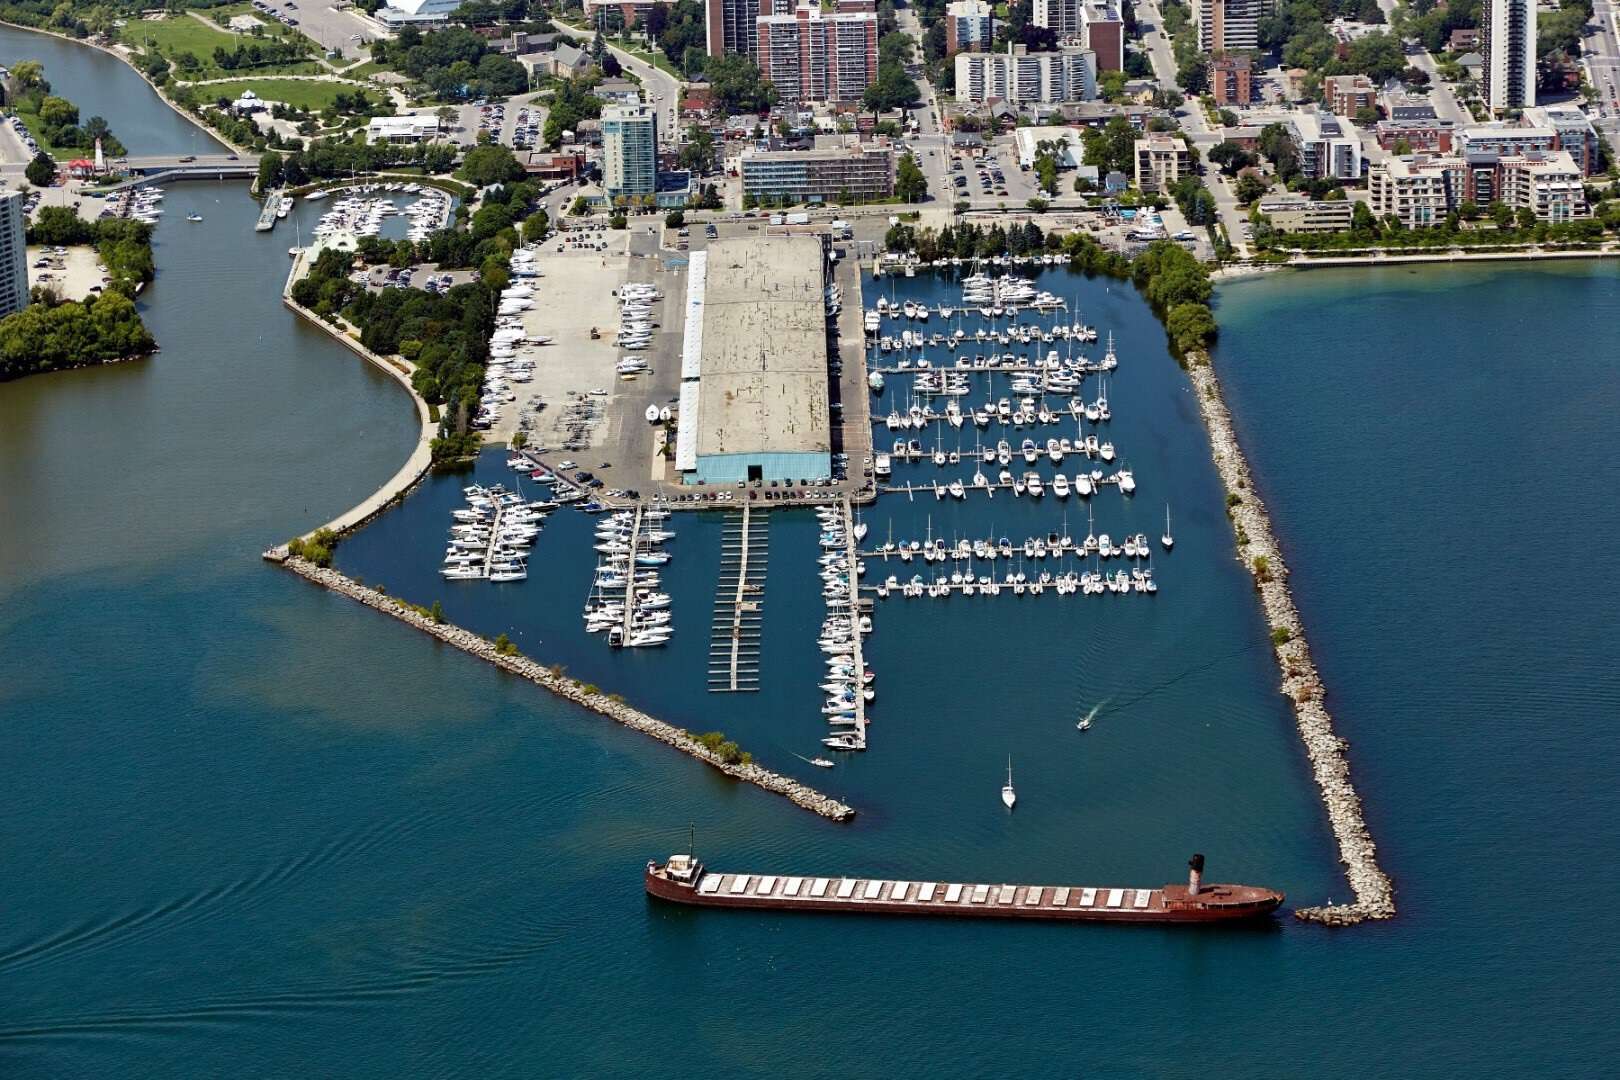 New waterfront park comes with new Mississauga marina